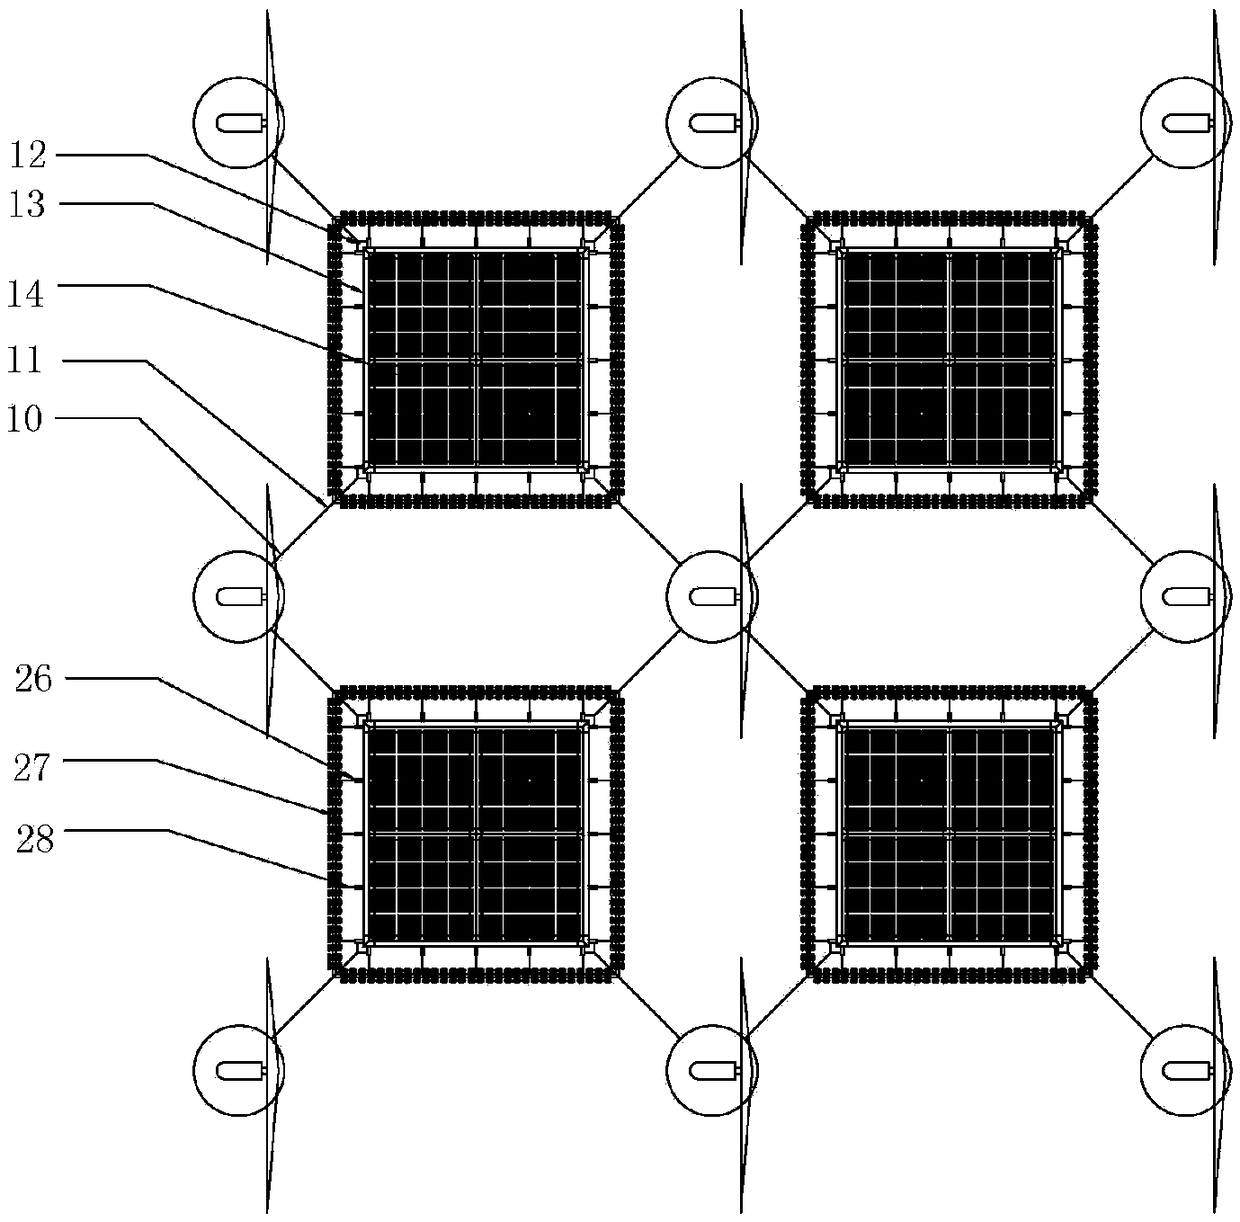 Integrated system of offshore wind, photovoltaic power generation and cage farming